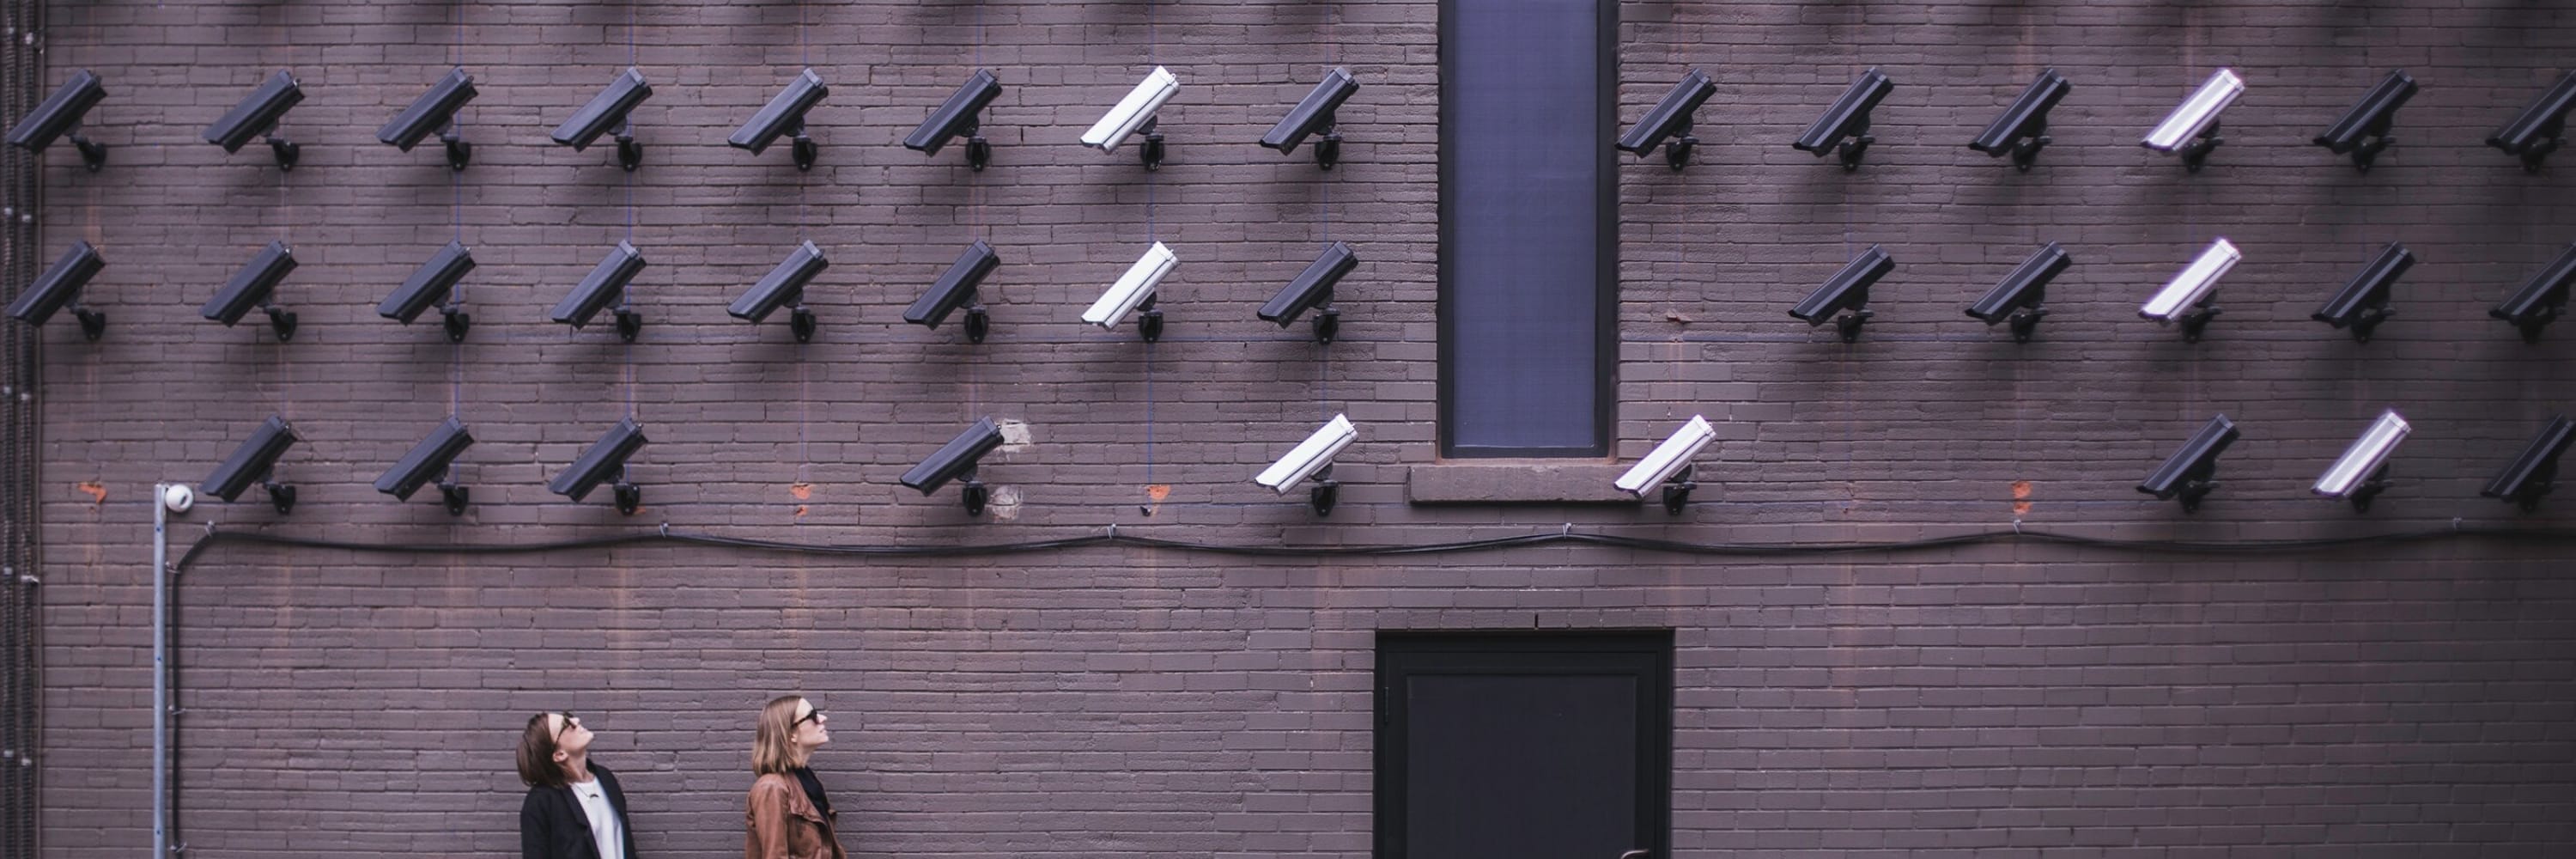 Why Study Digitalisation, Surveillance, and Societies?